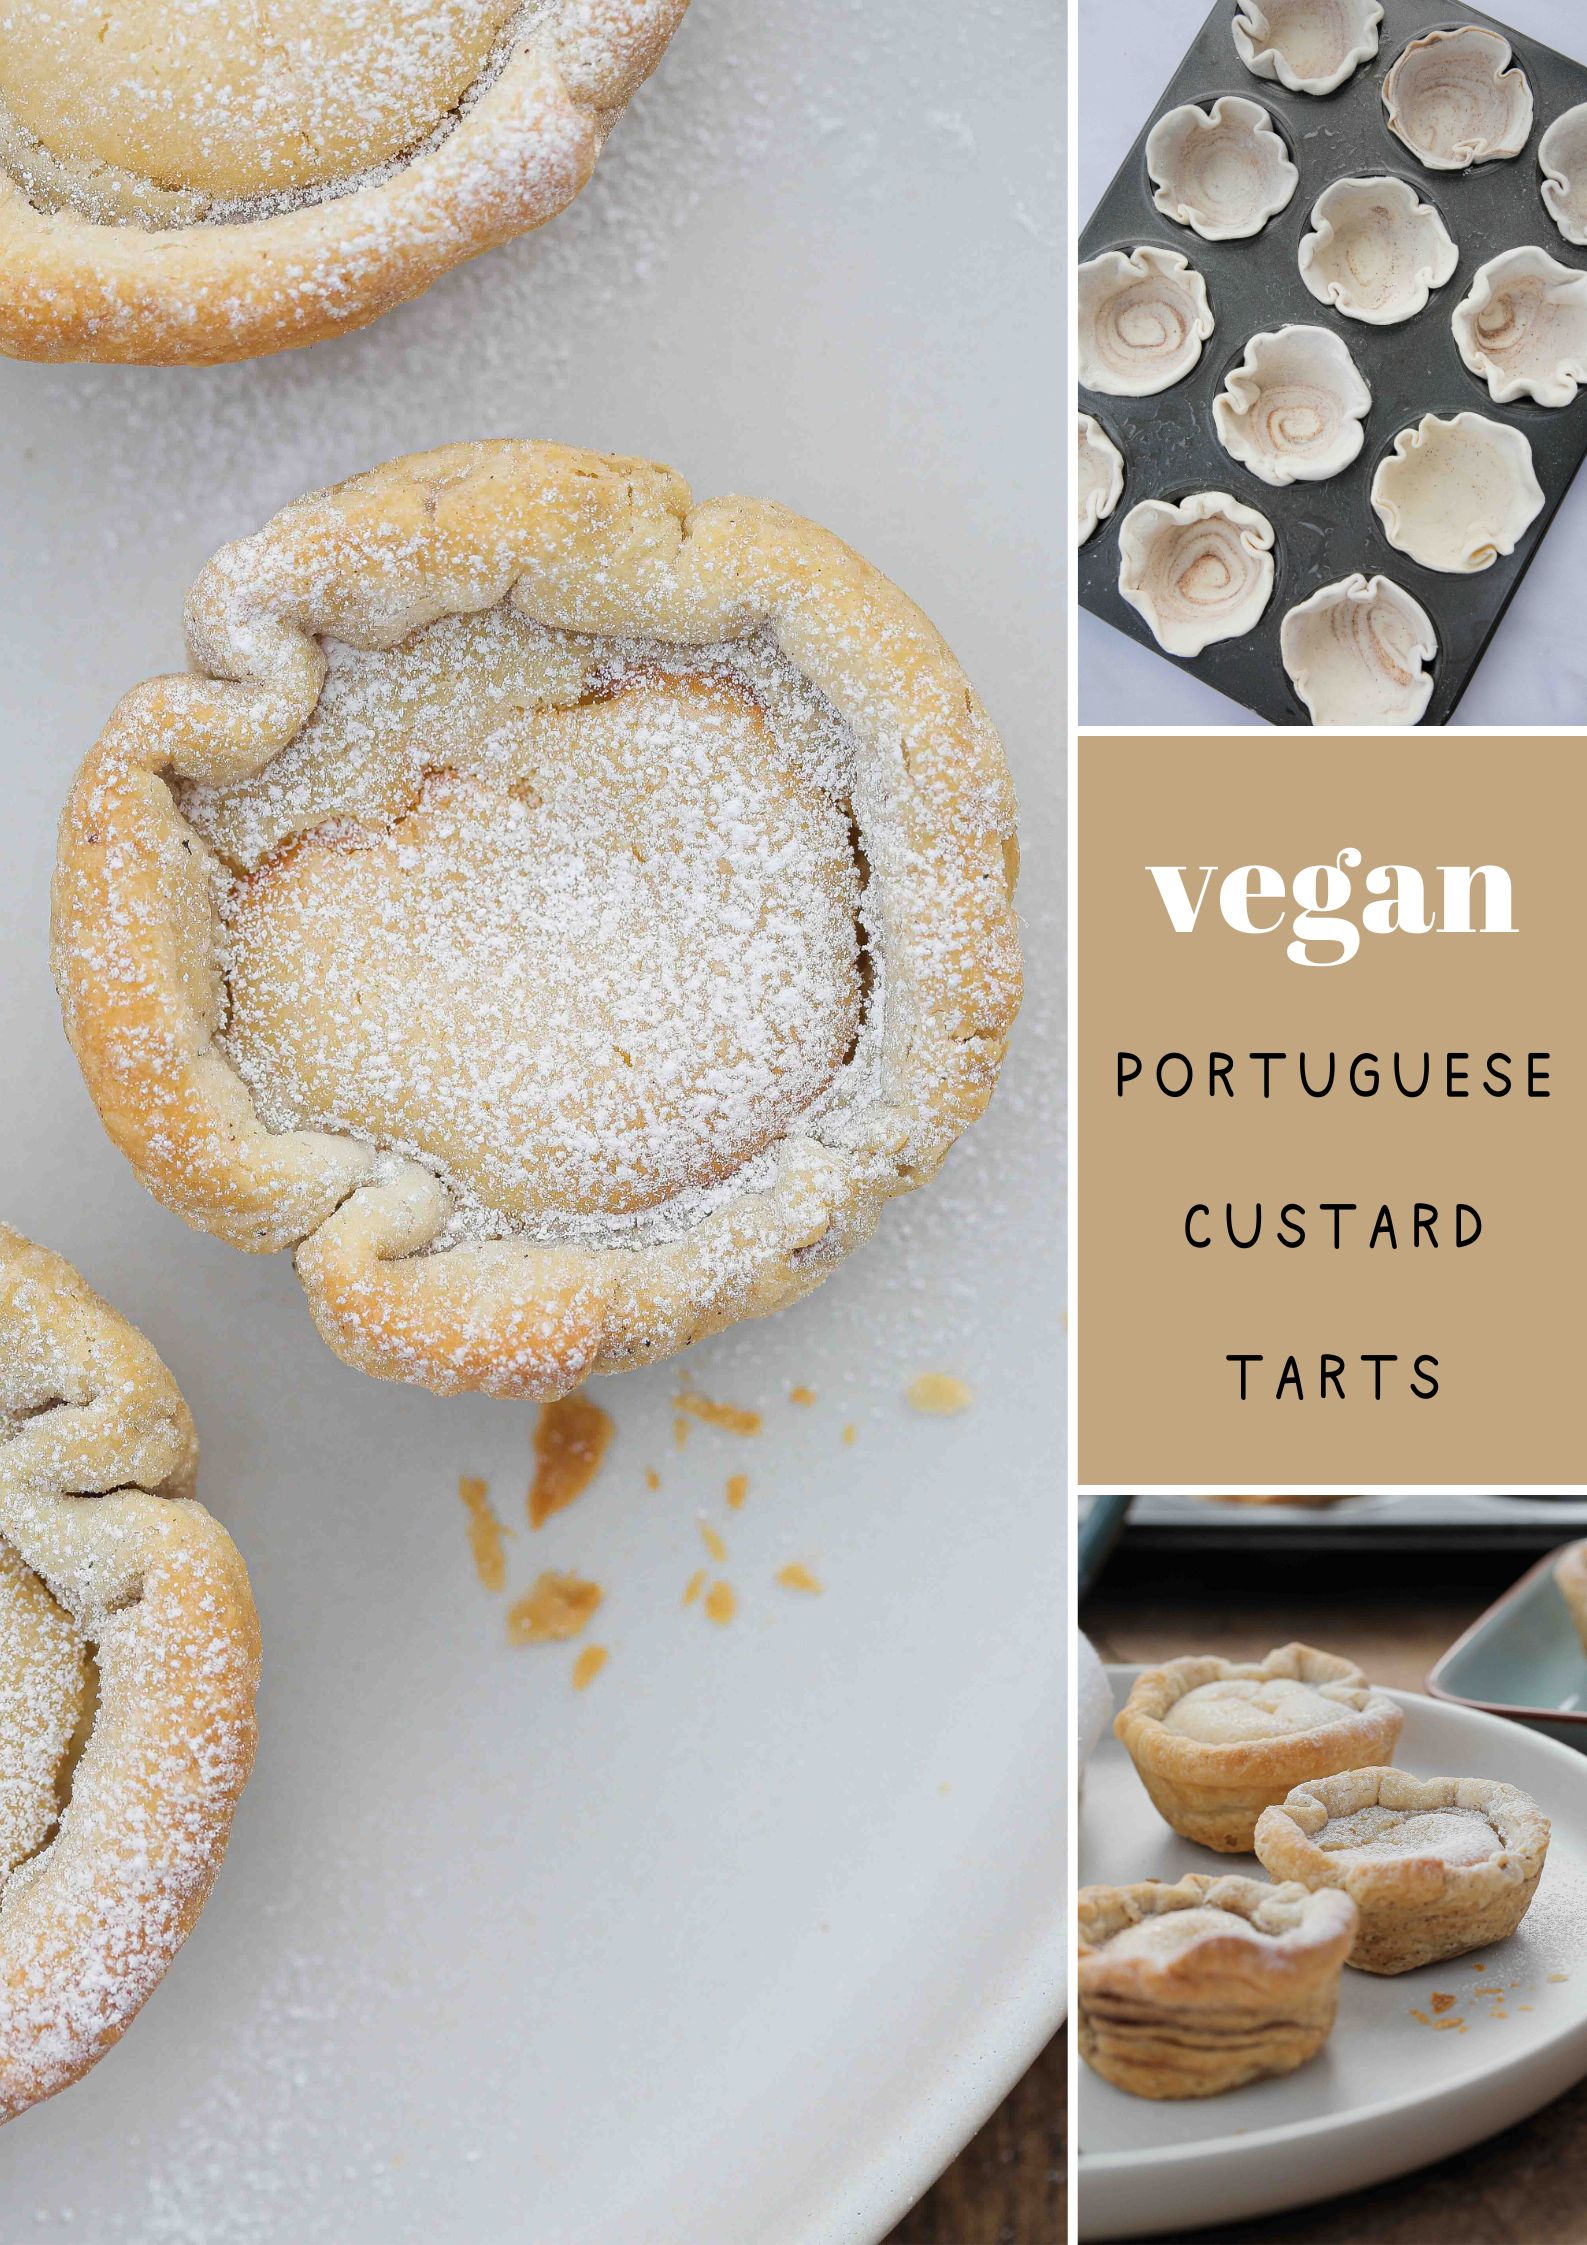 No plane ticket required for these Portuguese custard tarts! Creamy vegan custard is housed in a crisp puff pastry shell before being baked to golden perfection. Recipe in thecookandhim.com | #vegancustard #portuguesecustardtart #eggfreecustard #pasteldenata #tofurecipes